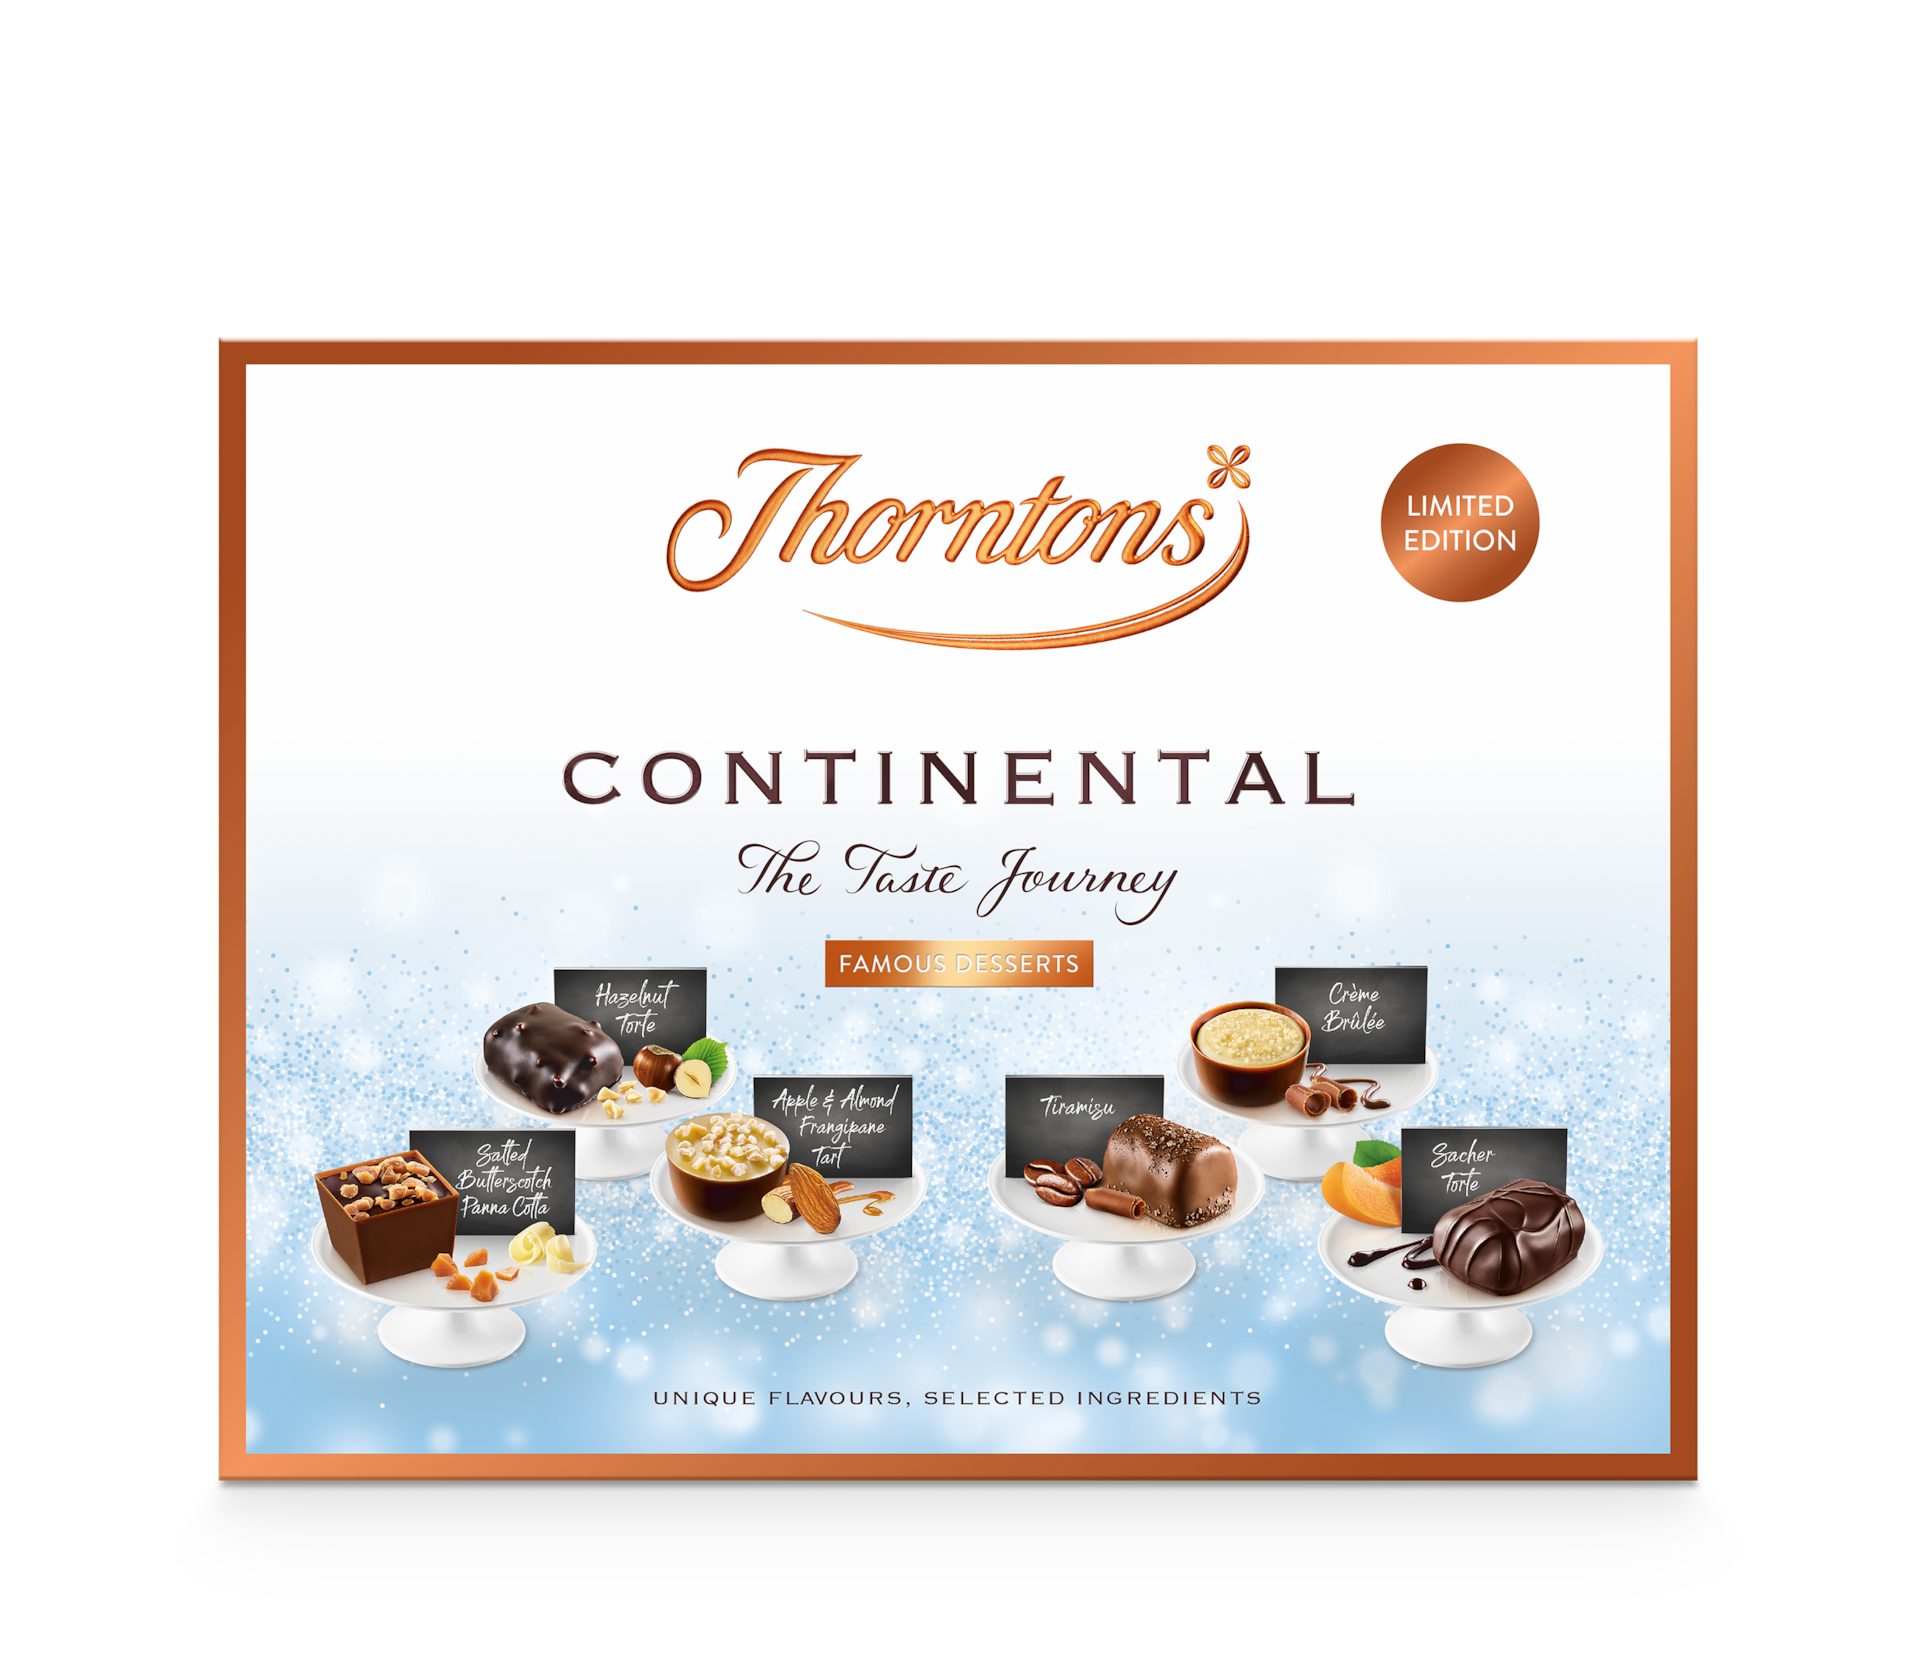 https://www.thorntons.com/medias/sys_master/images/hd7/hcb/8916767309854/77234322_main/77234322-main.png?resize=xs-s-xs